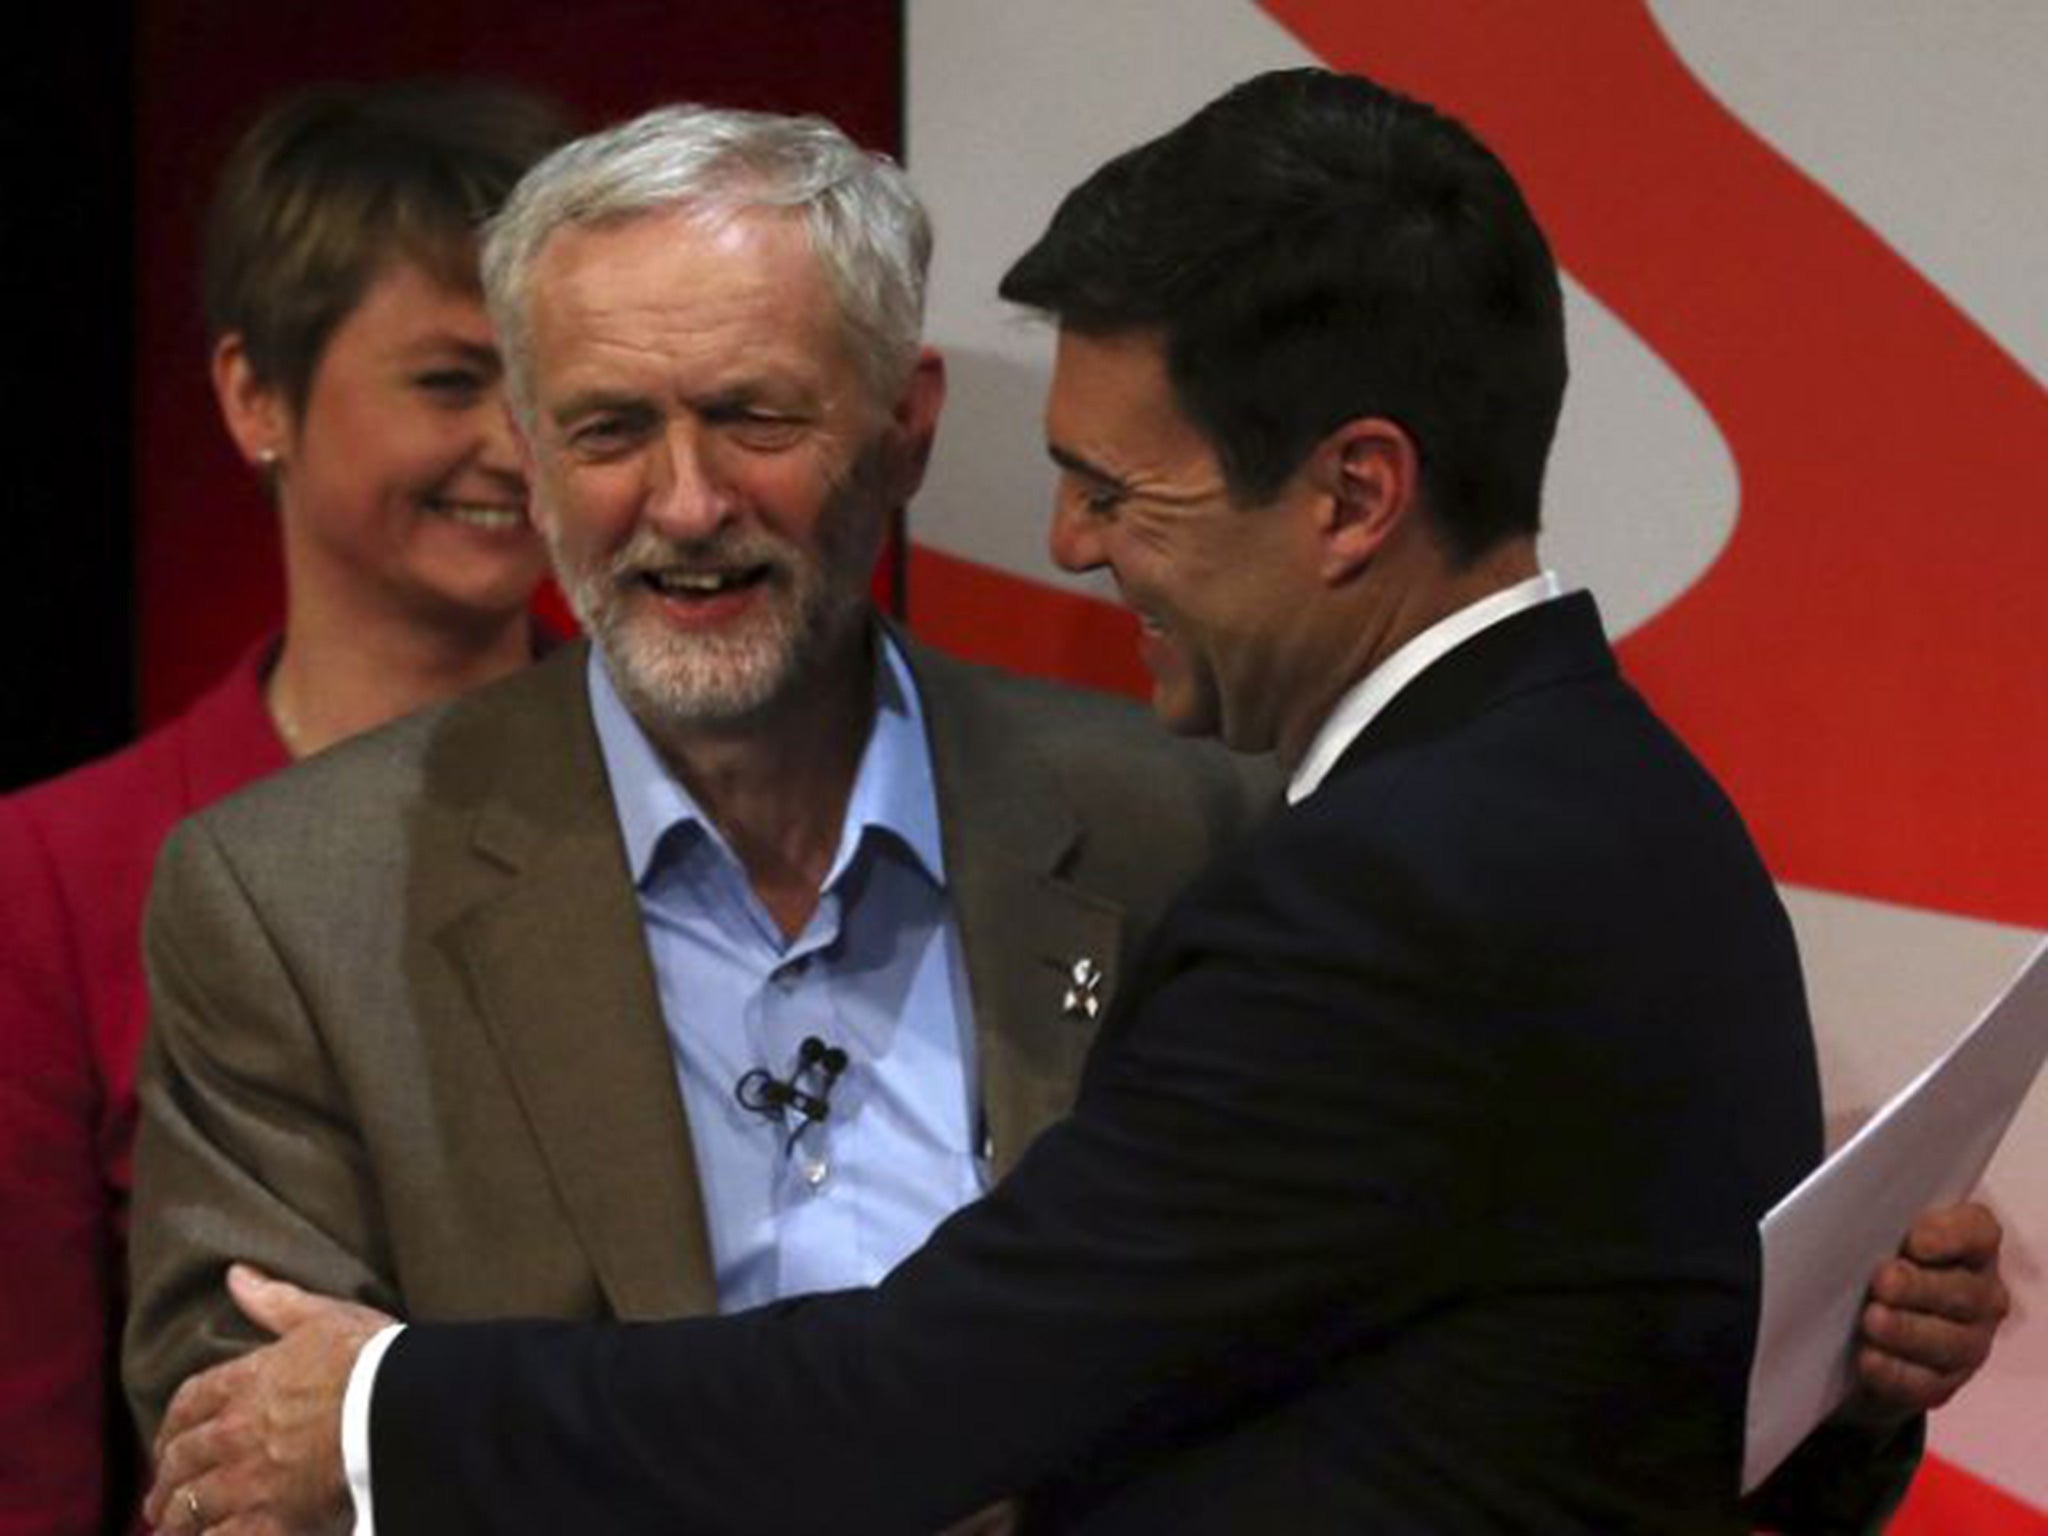 Jeremy Corbyn has said that he would offer Andy Burnham the job of Shadow Chancellor